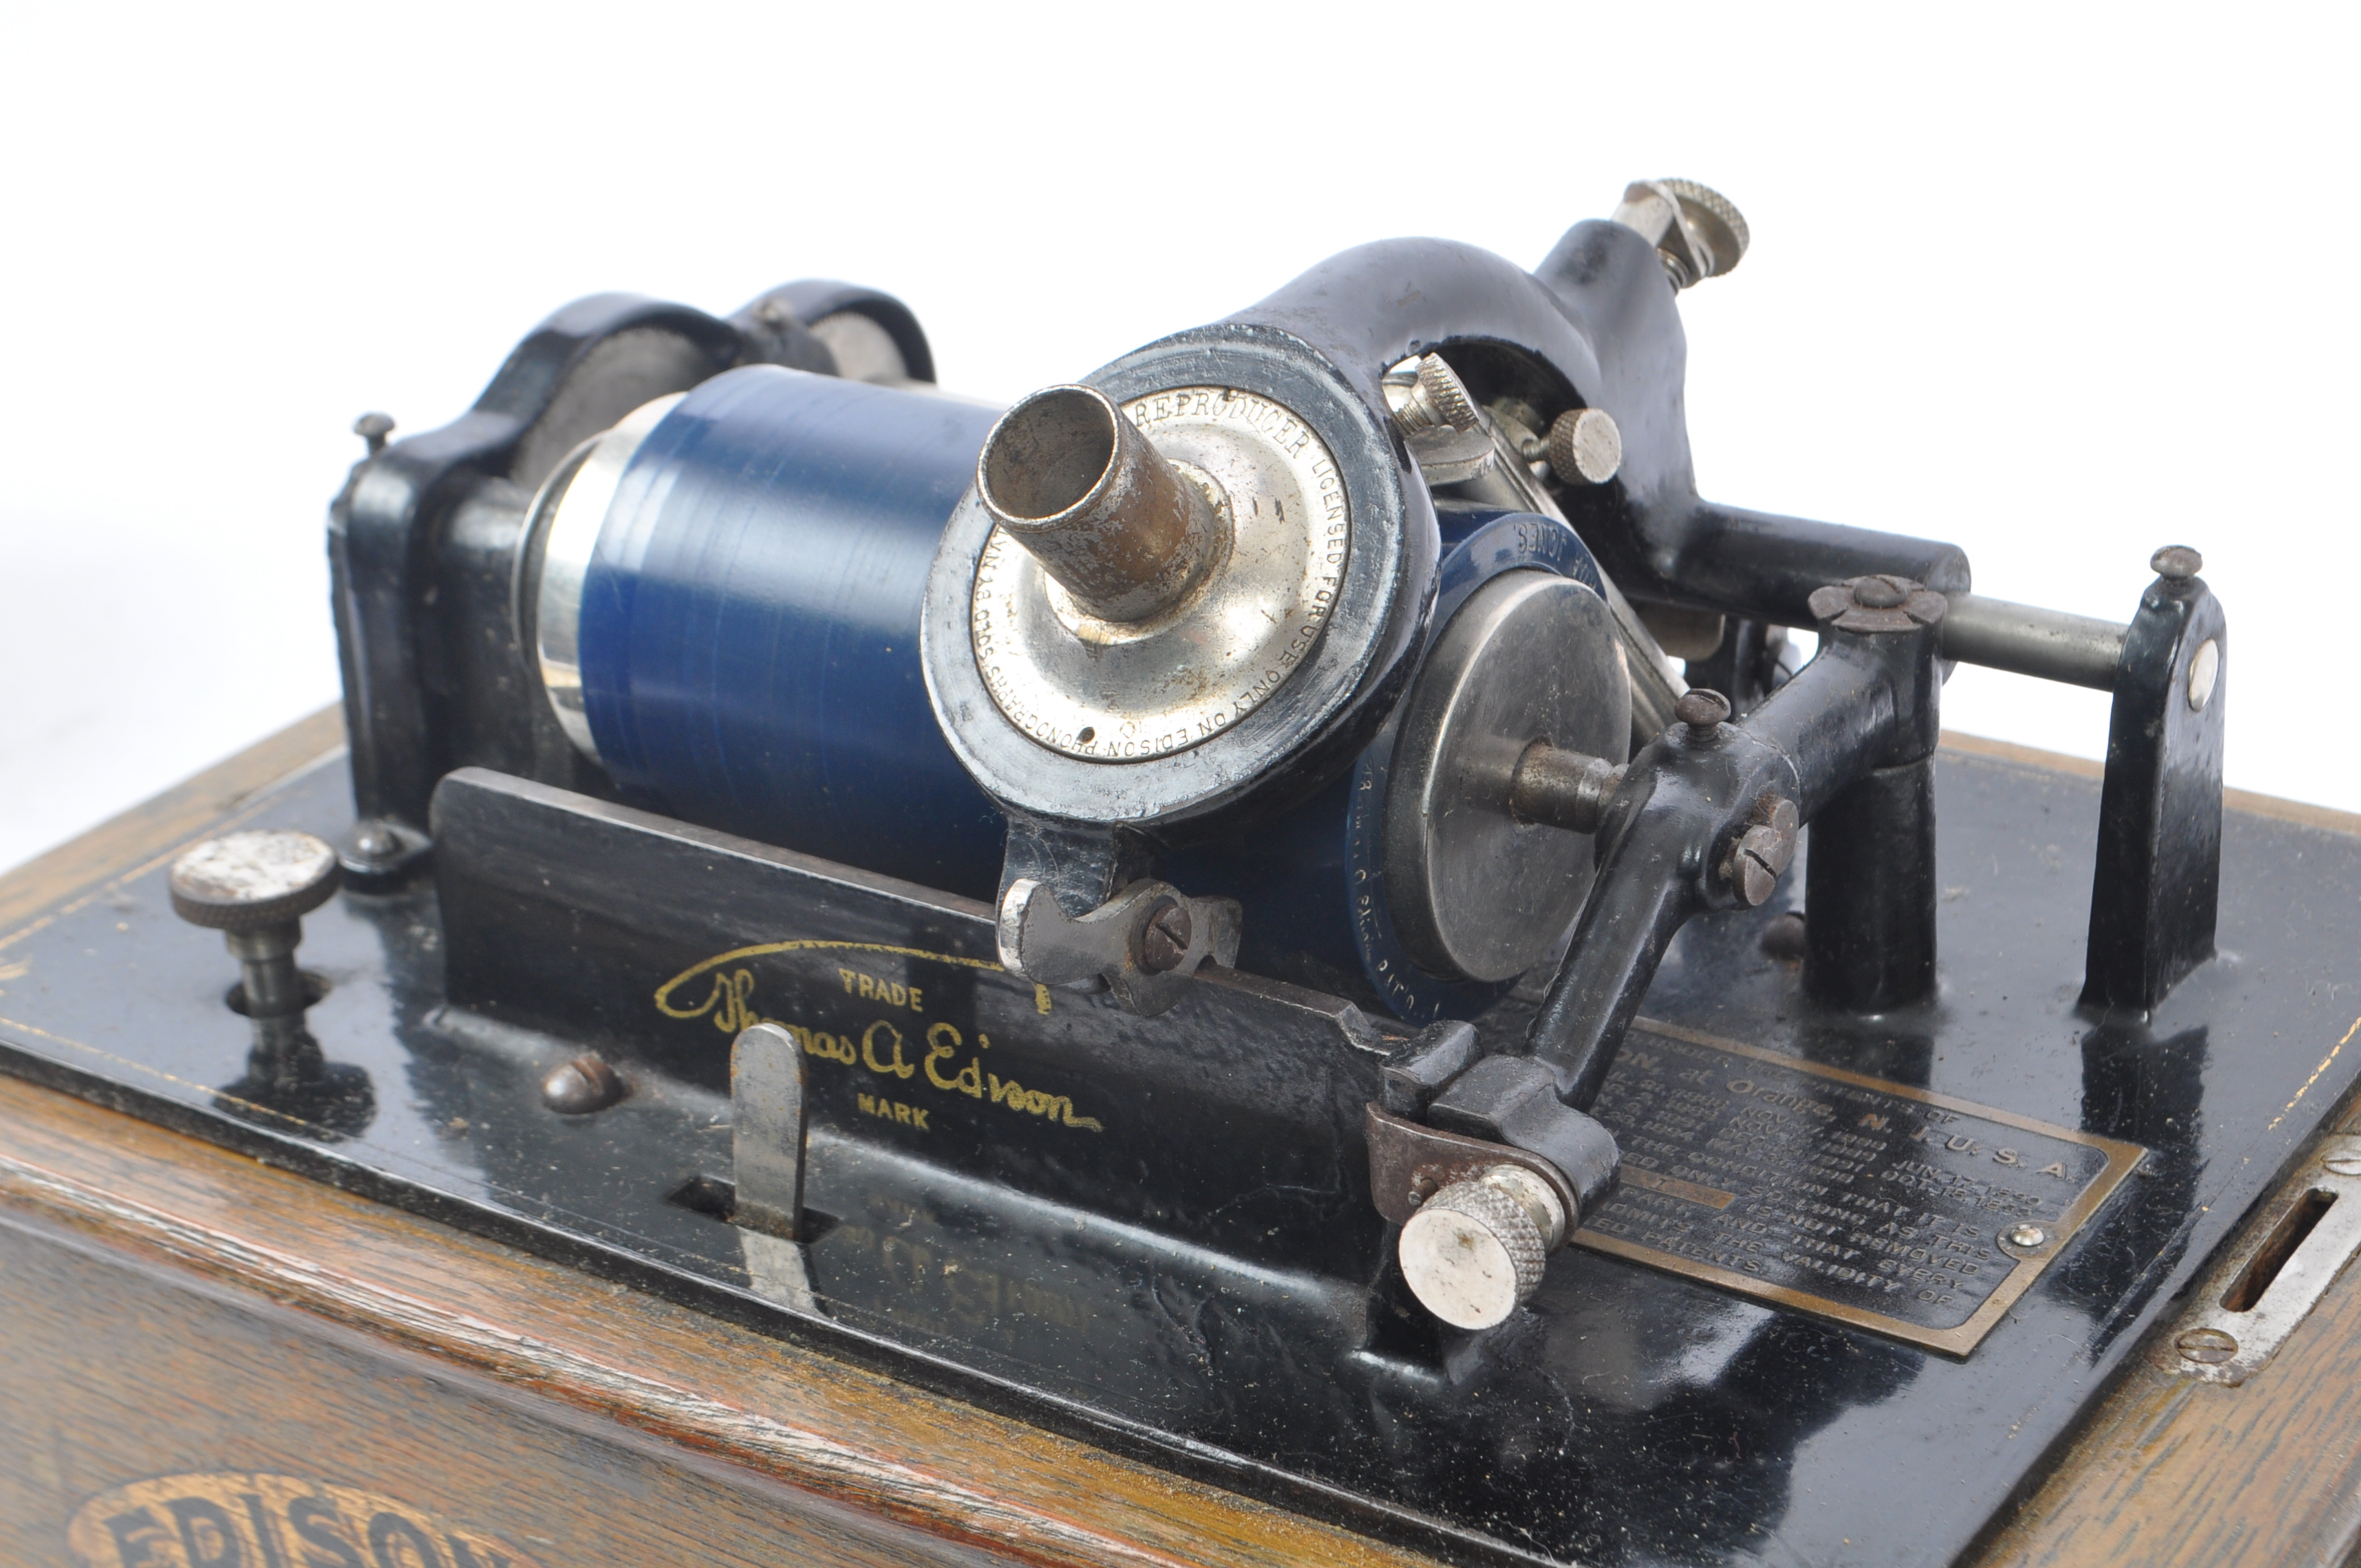 EDISON STANDARD PHONOGRAPH - EARLY 20TH CENTURY - Image 3 of 8